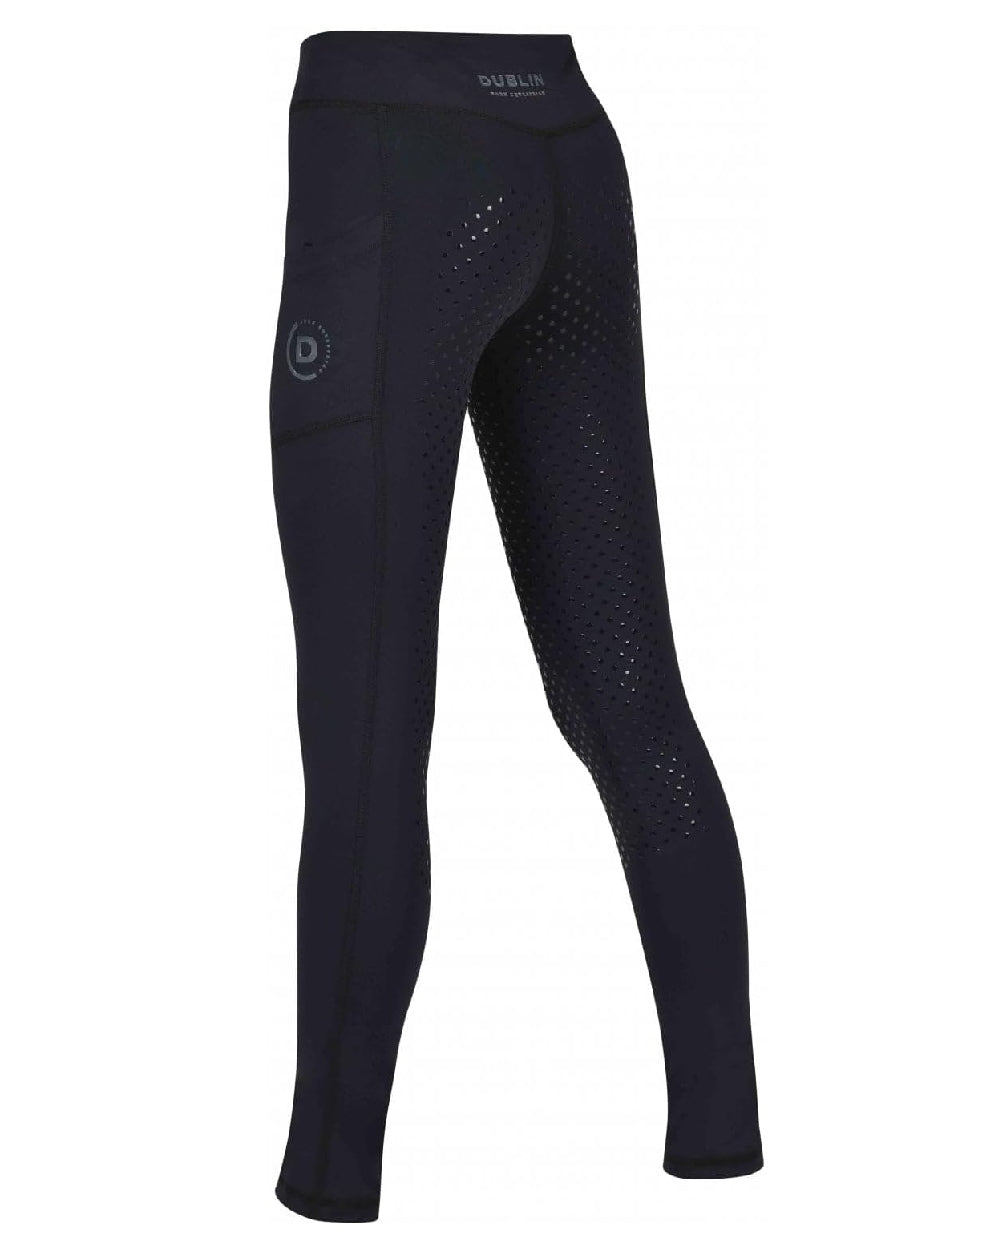 Black coloured Dublin Childrens Everyday Riding Tights on white background 